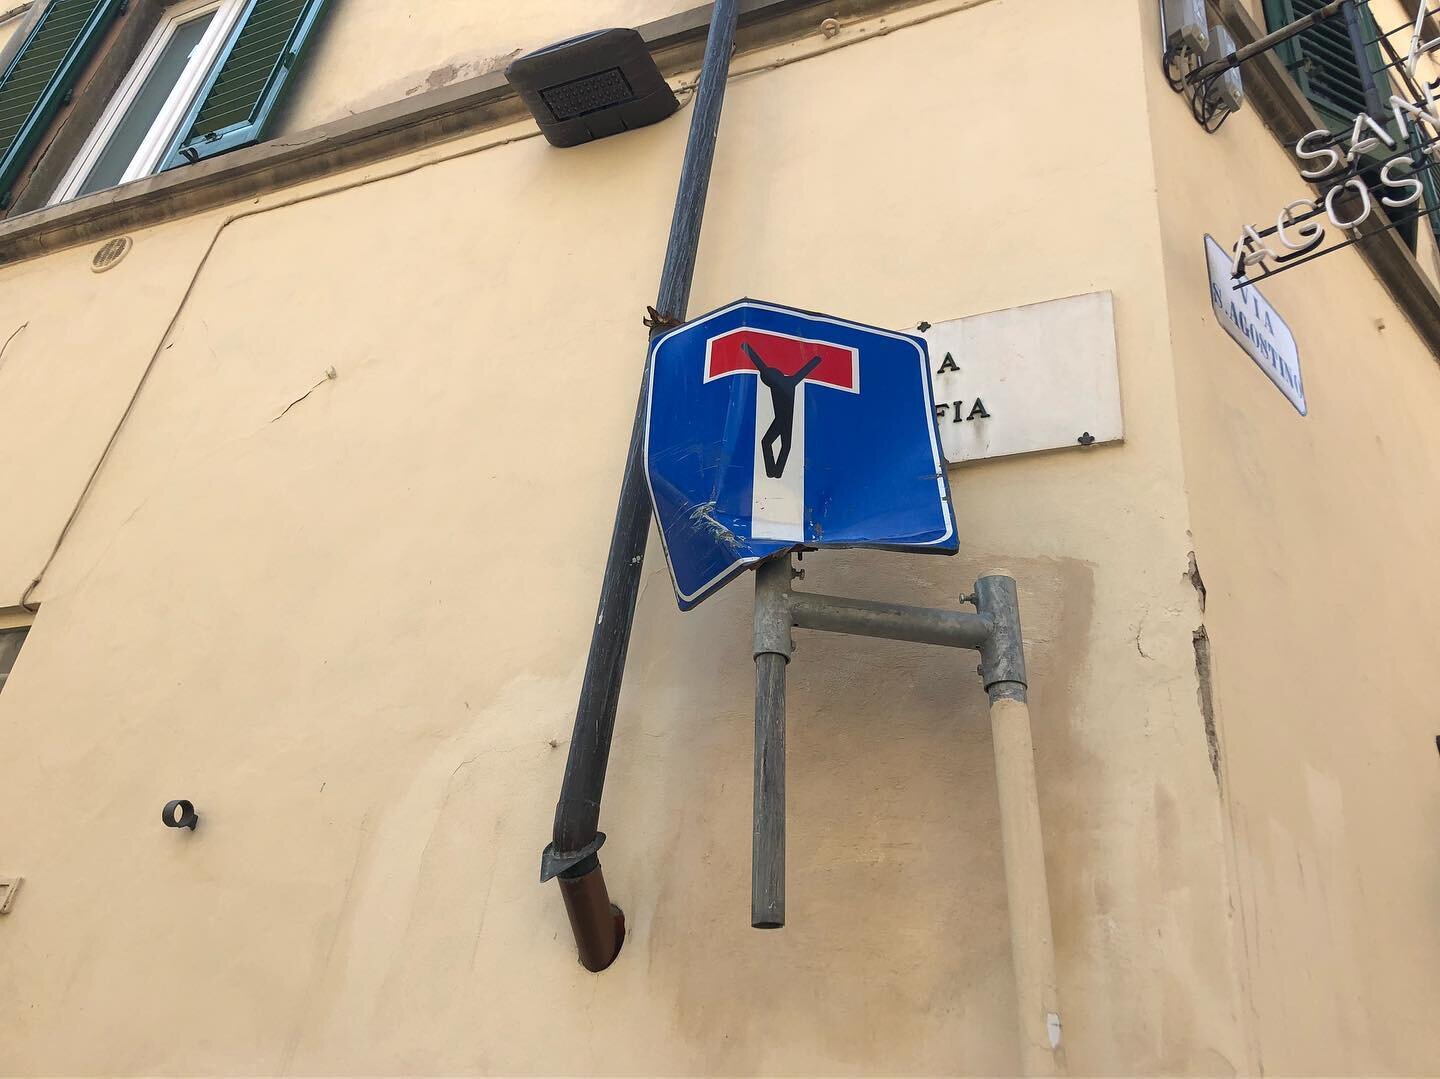 Some work by Clet Abraham, I believe. #firenze #florence #cletabraham #italy #italia